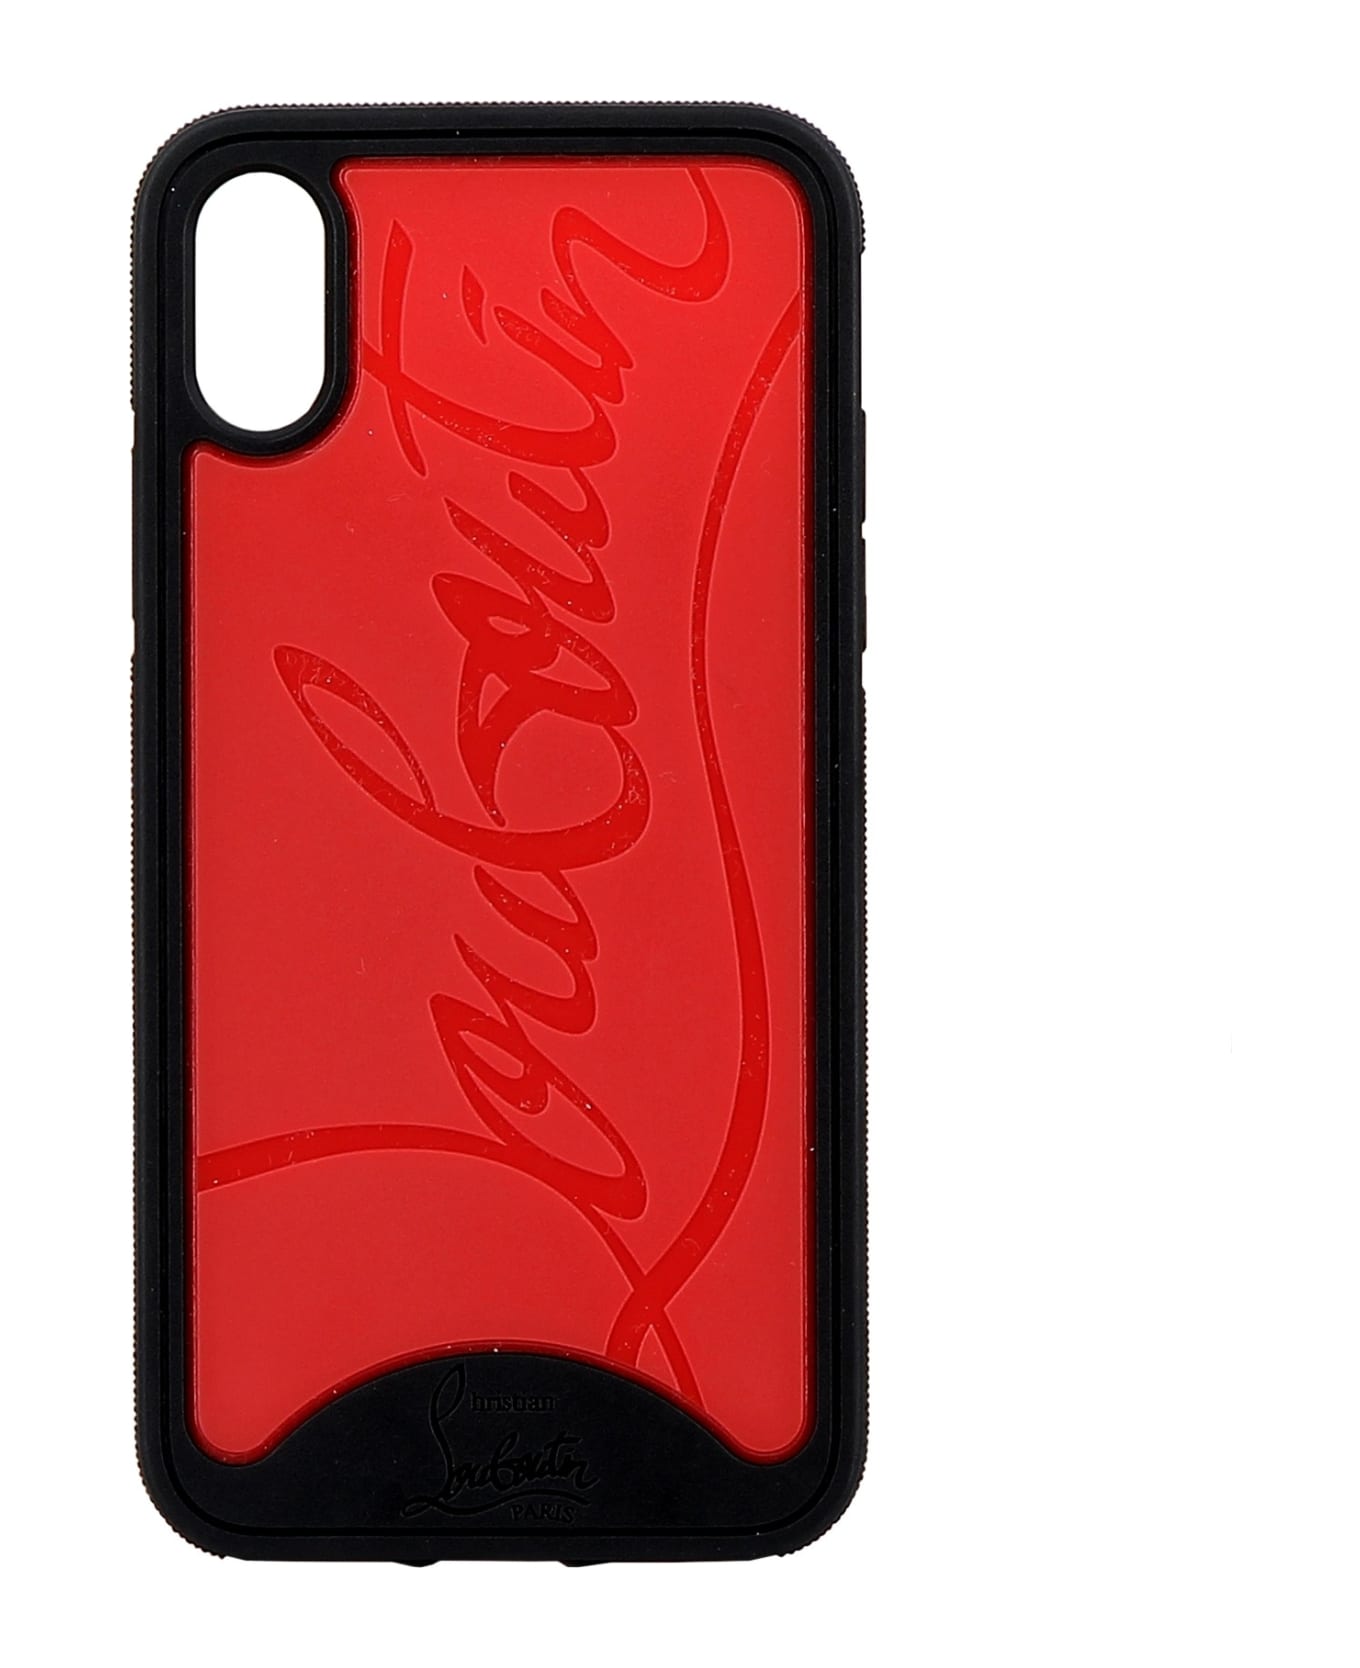 Christian Louboutin Black/red Rubber Cover - BLACK